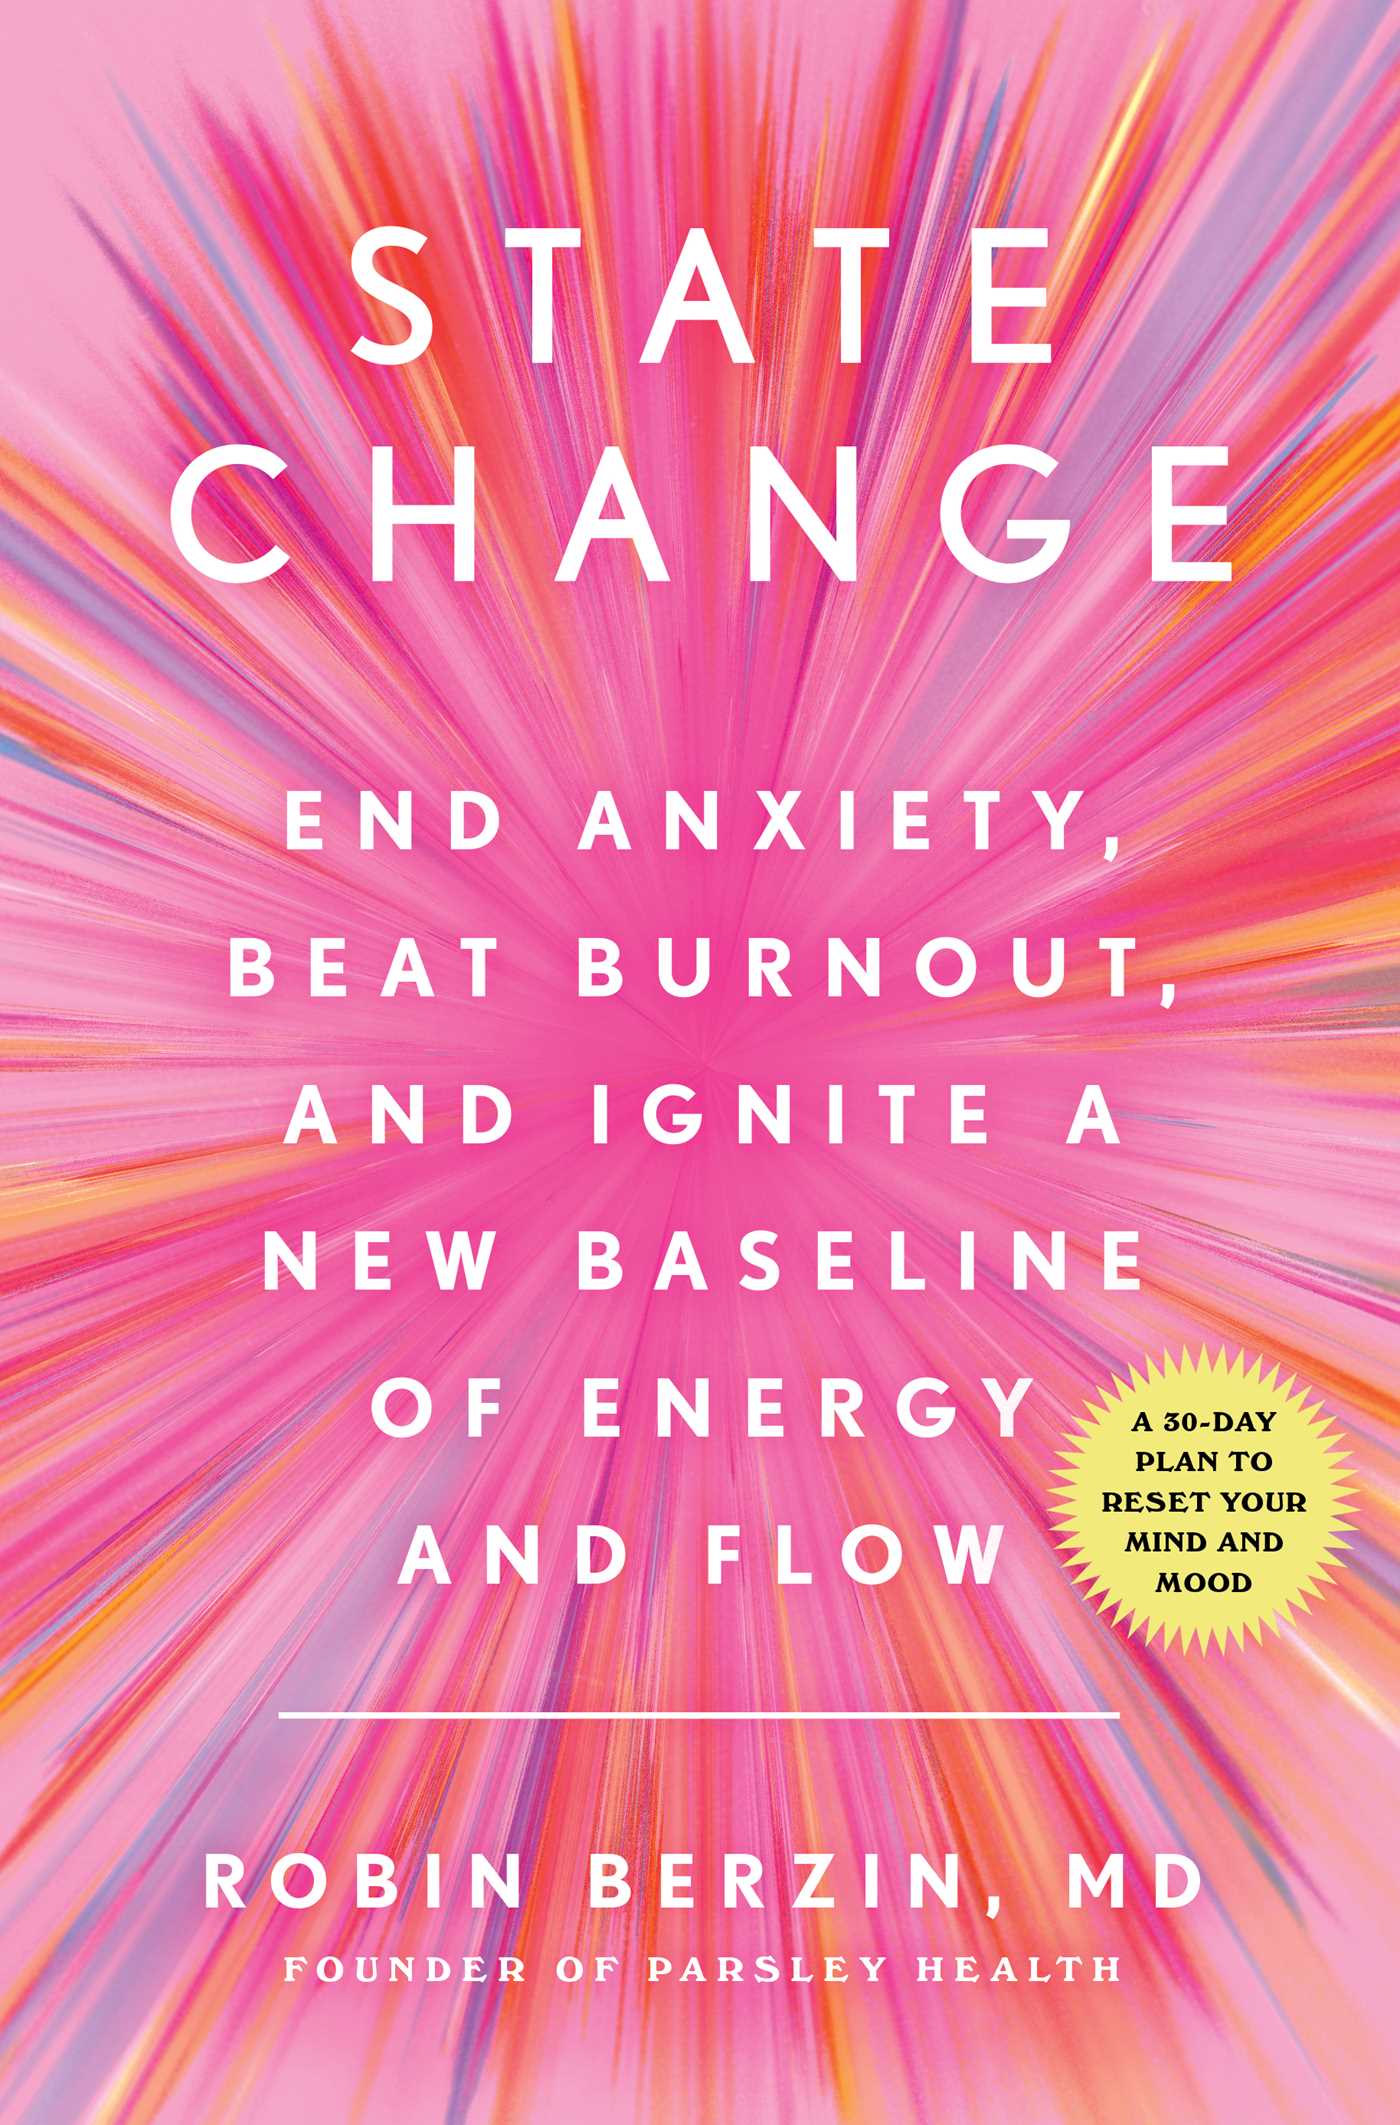 State Change: End Anxiety, Beat Burnout, and Ignite a New Baseline of Energy and Flow by Robin Berzin